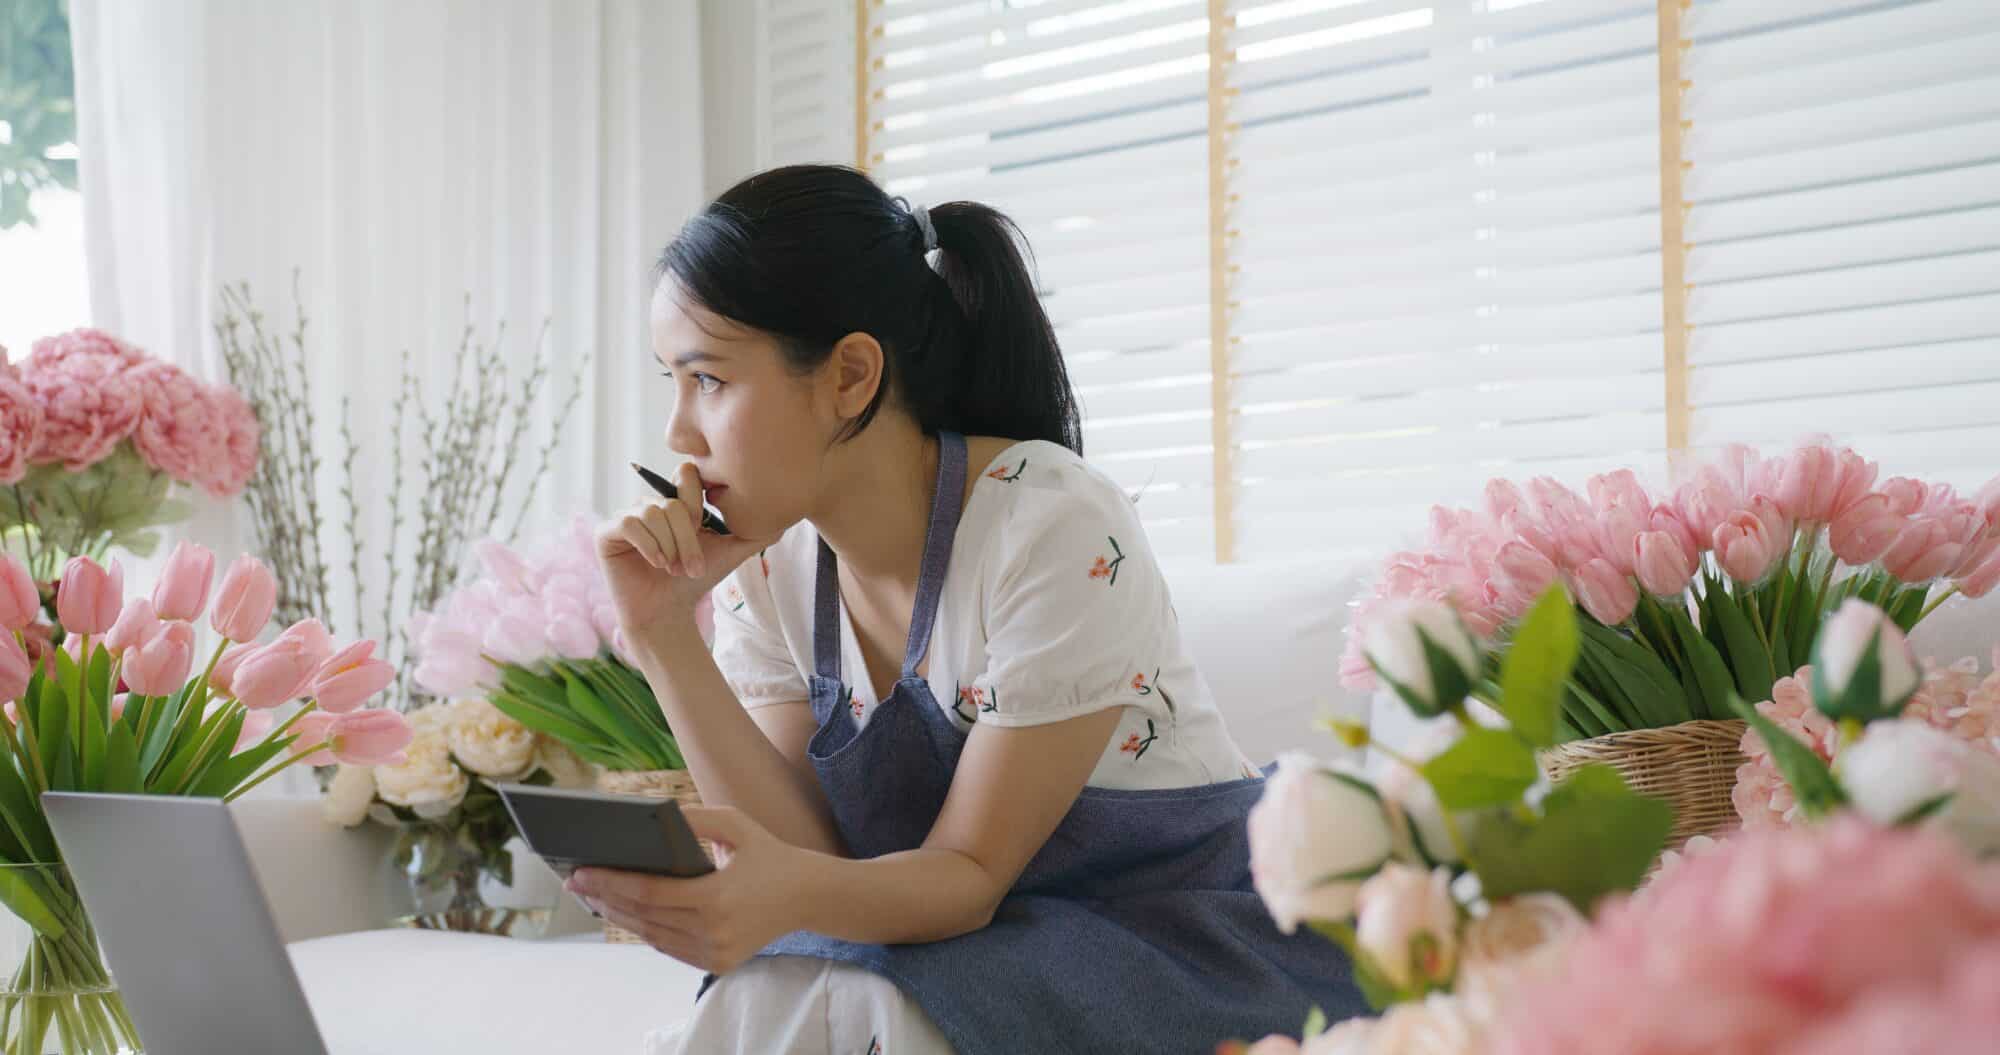 A woman sitting between flowers in a frustrated pose.